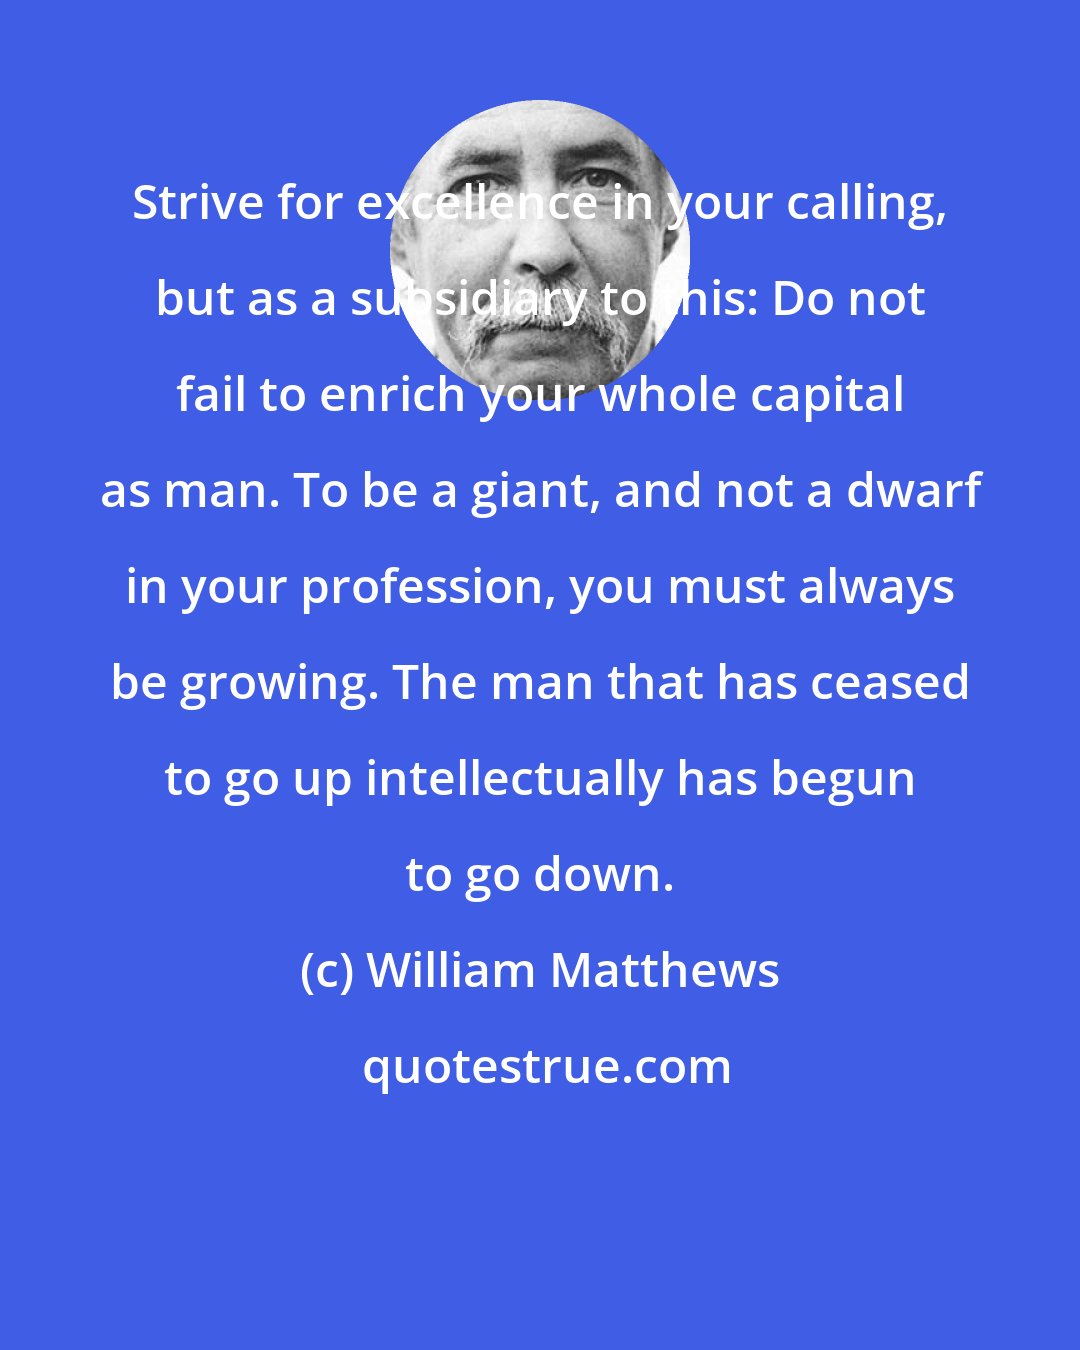 William Matthews: Strive for excellence in your calling, but as a subsidiary to this: Do not fail to enrich your whole capital as man. To be a giant, and not a dwarf in your profession, you must always be growing. The man that has ceased to go up intellectually has begun to go down.